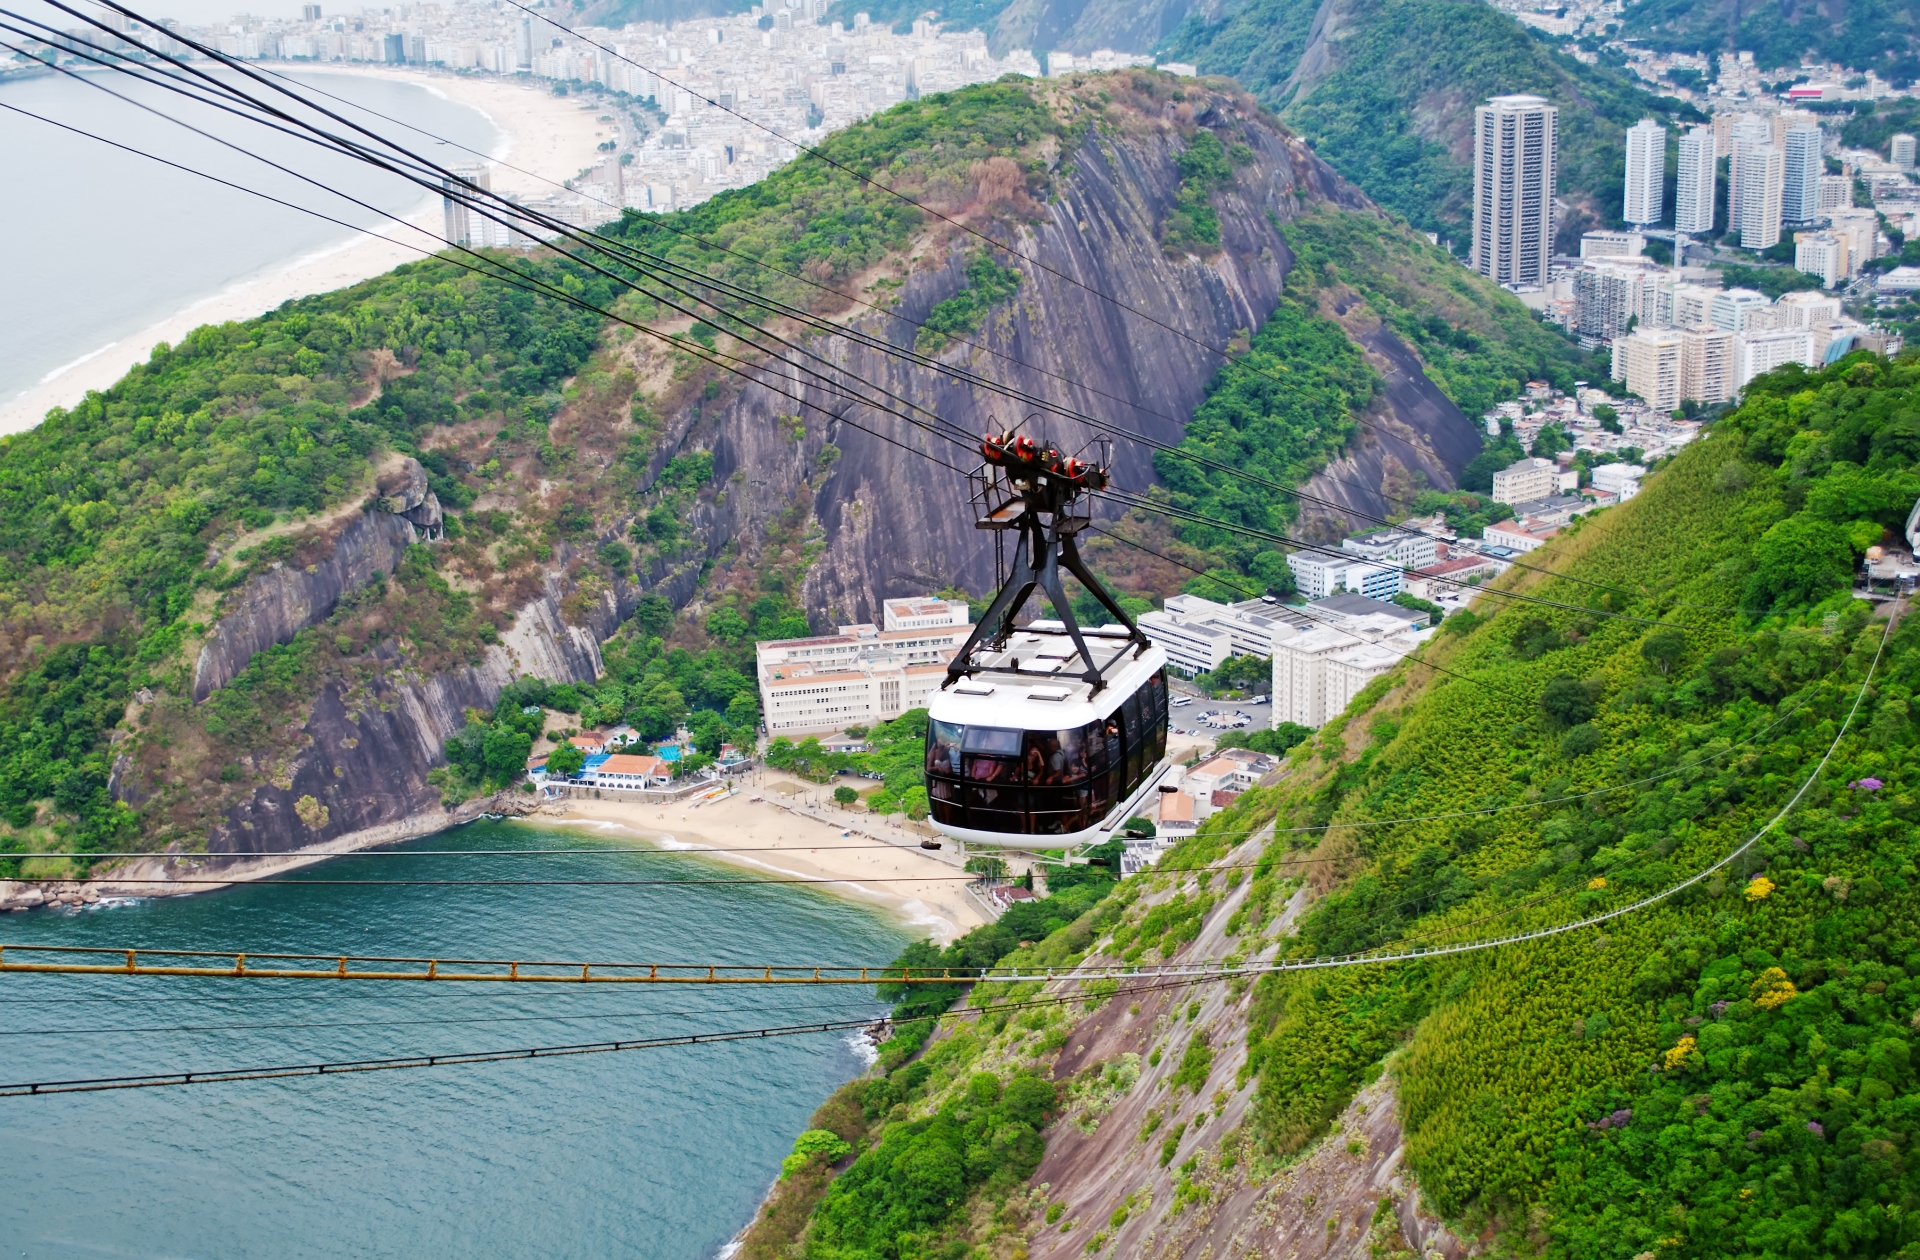 Cable car to Sugar Loaf Mountain